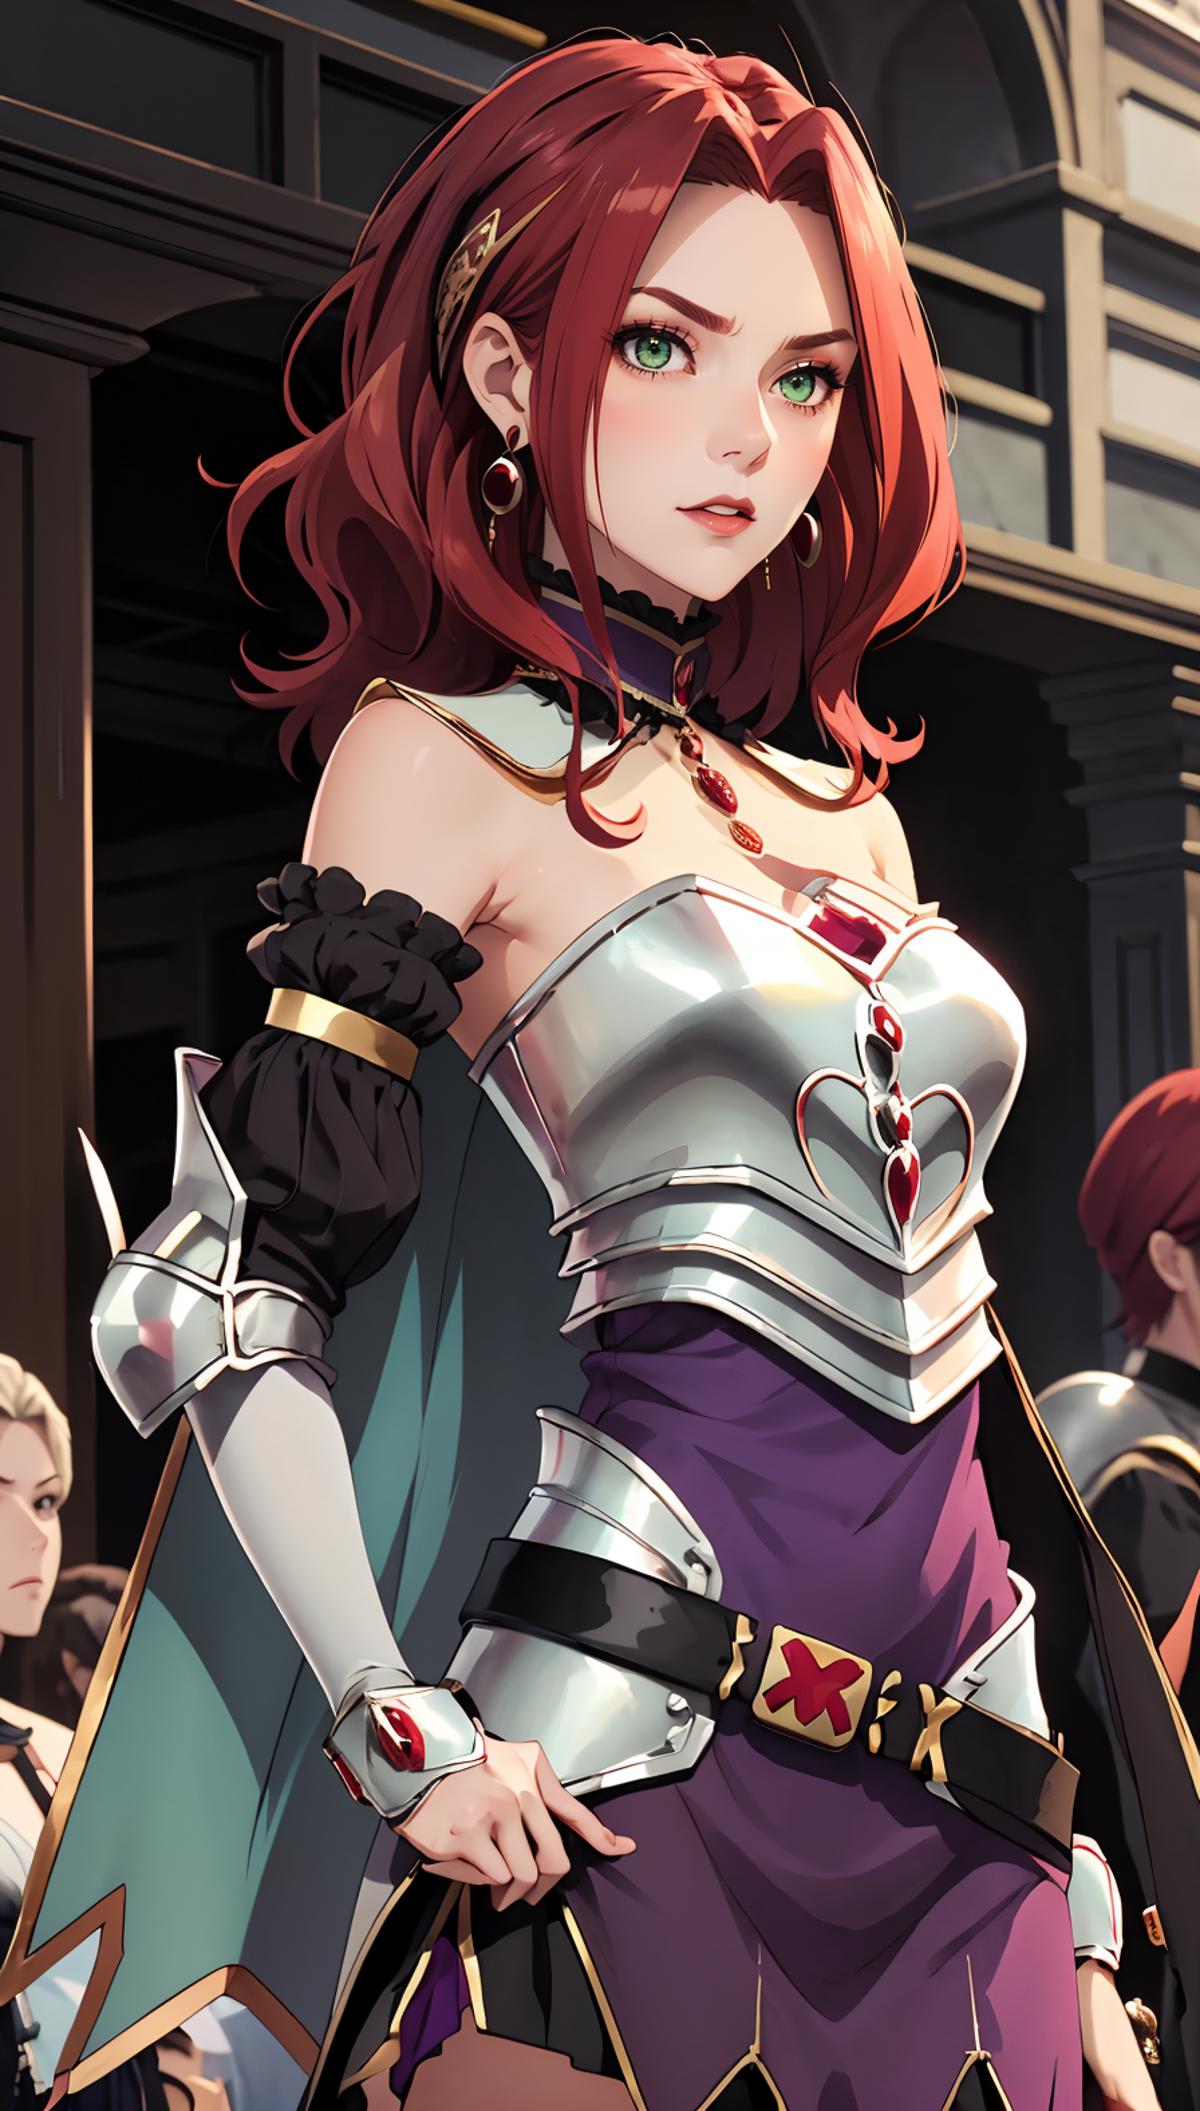 A red-haired woman wearing a silver armor and a cape.